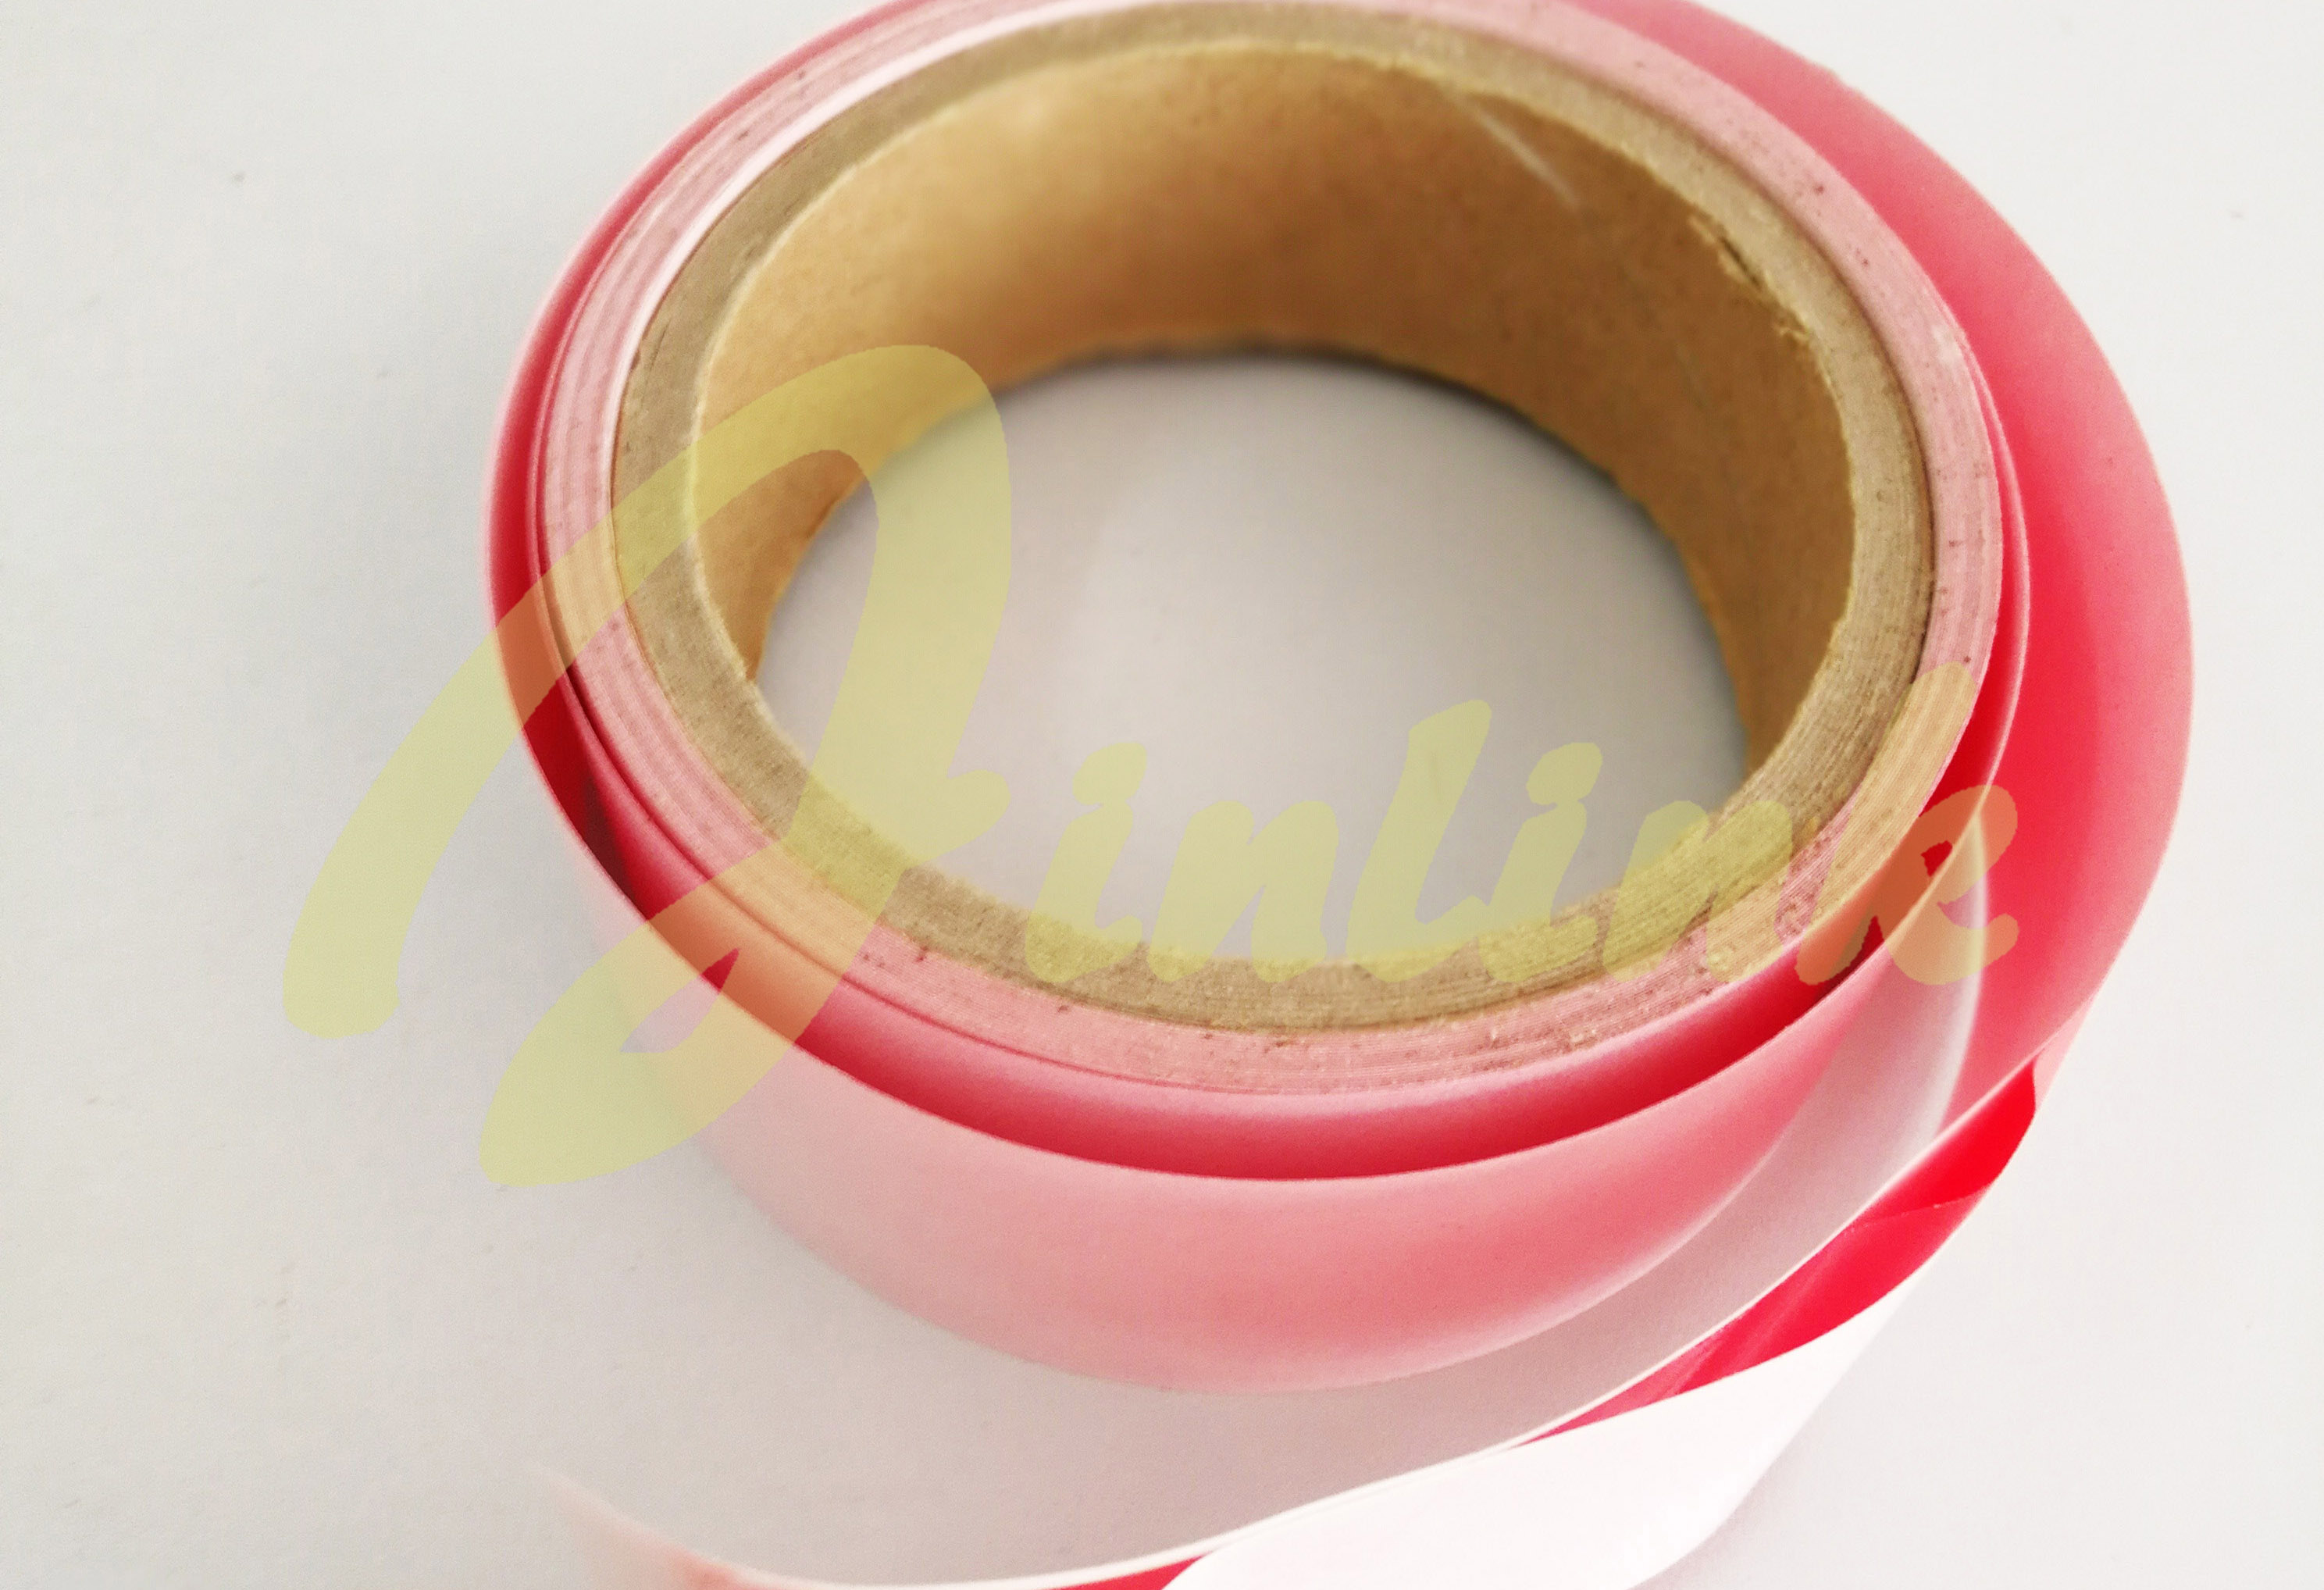 Double sided Tamper evident security tape for bags